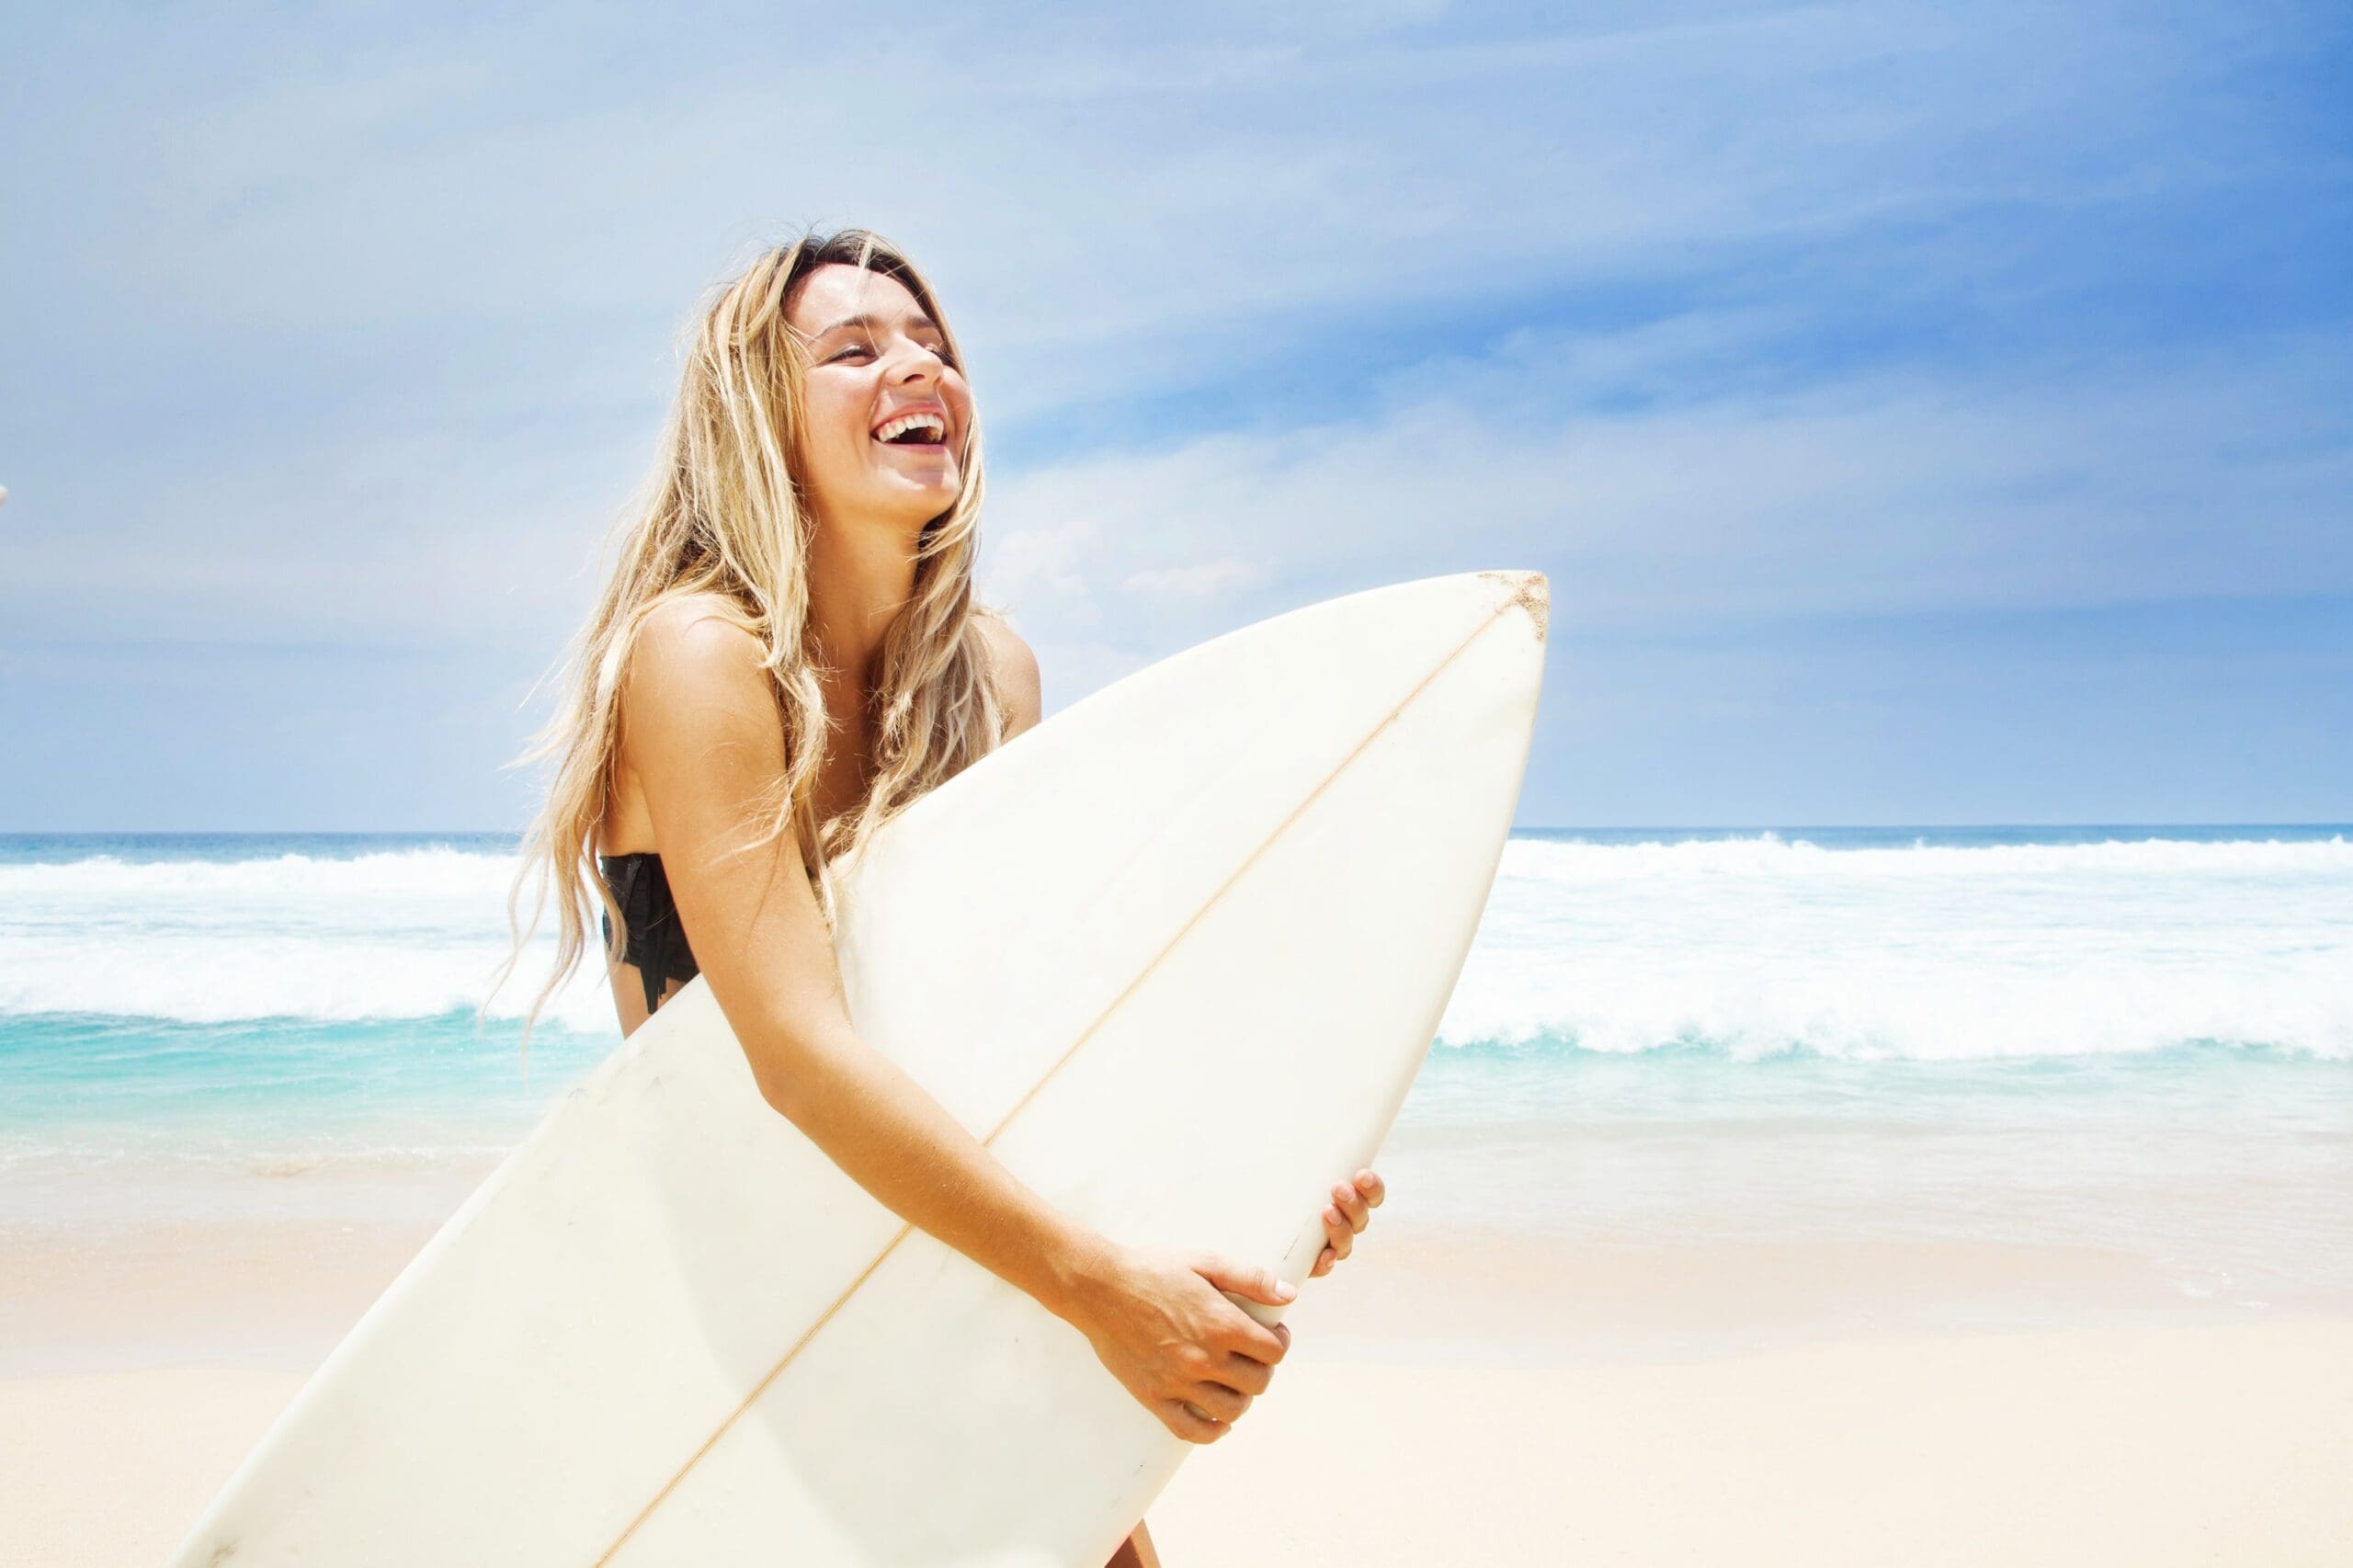 young woman blonde hair girl holding surfboard